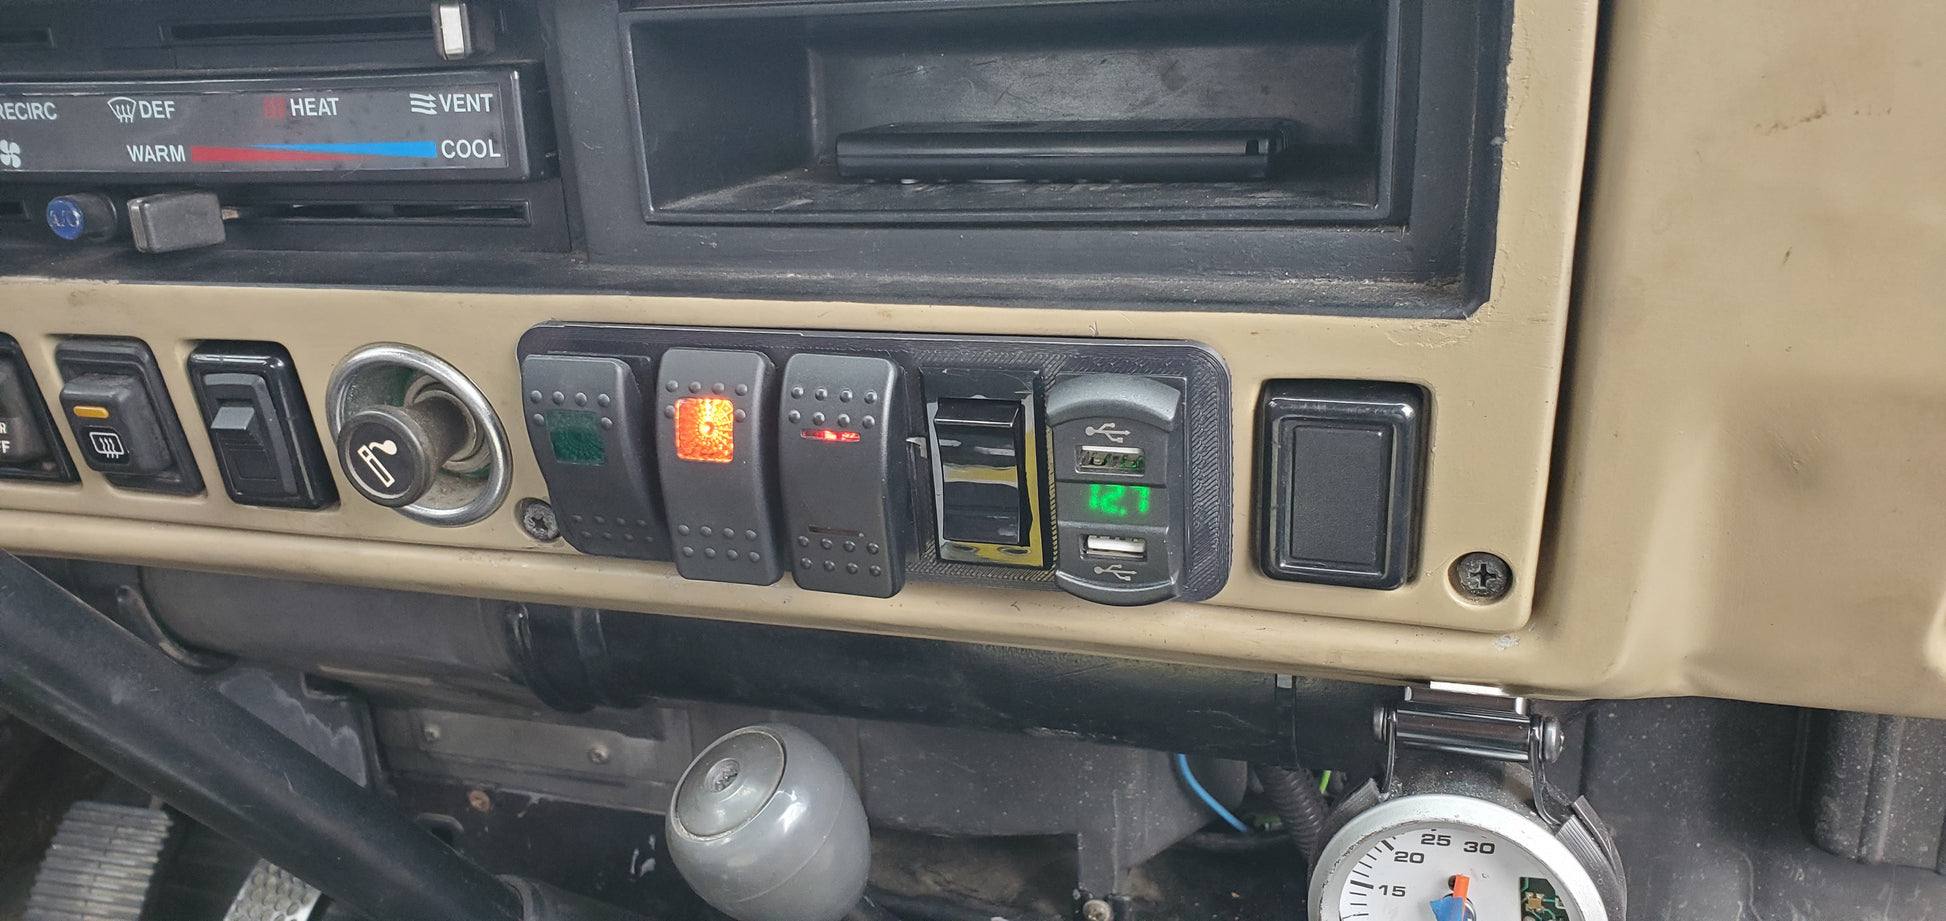 FJ60 ash trey switch panel installed into toyota dash with carling configuration